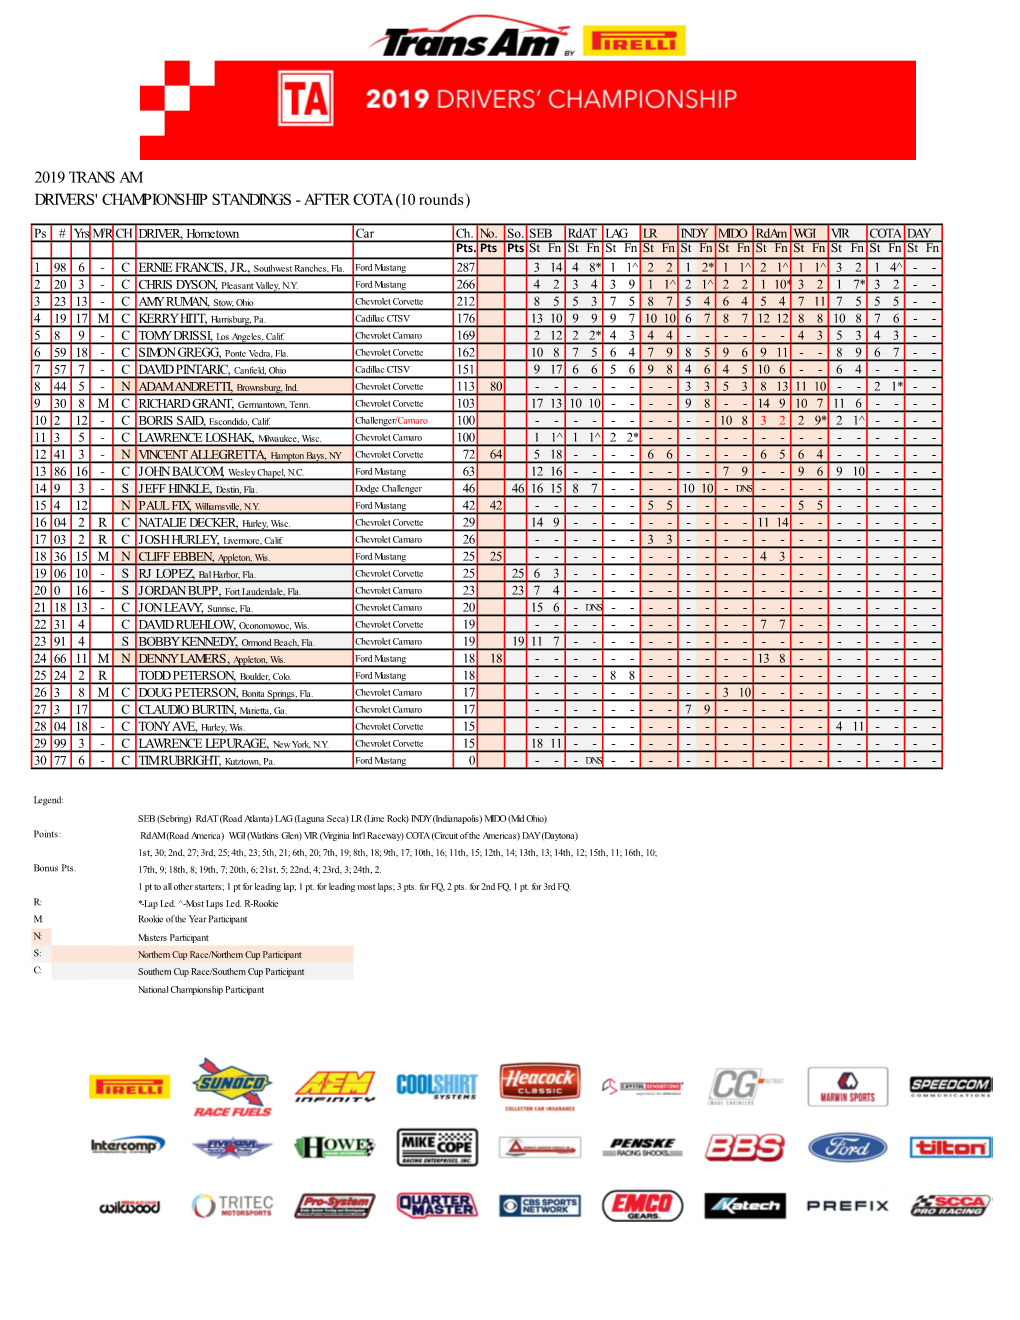 2019 TRANS AM DRIVERS' CHAMPIONSHIP STANDINGS - AFTER COTA (10 Rounds)